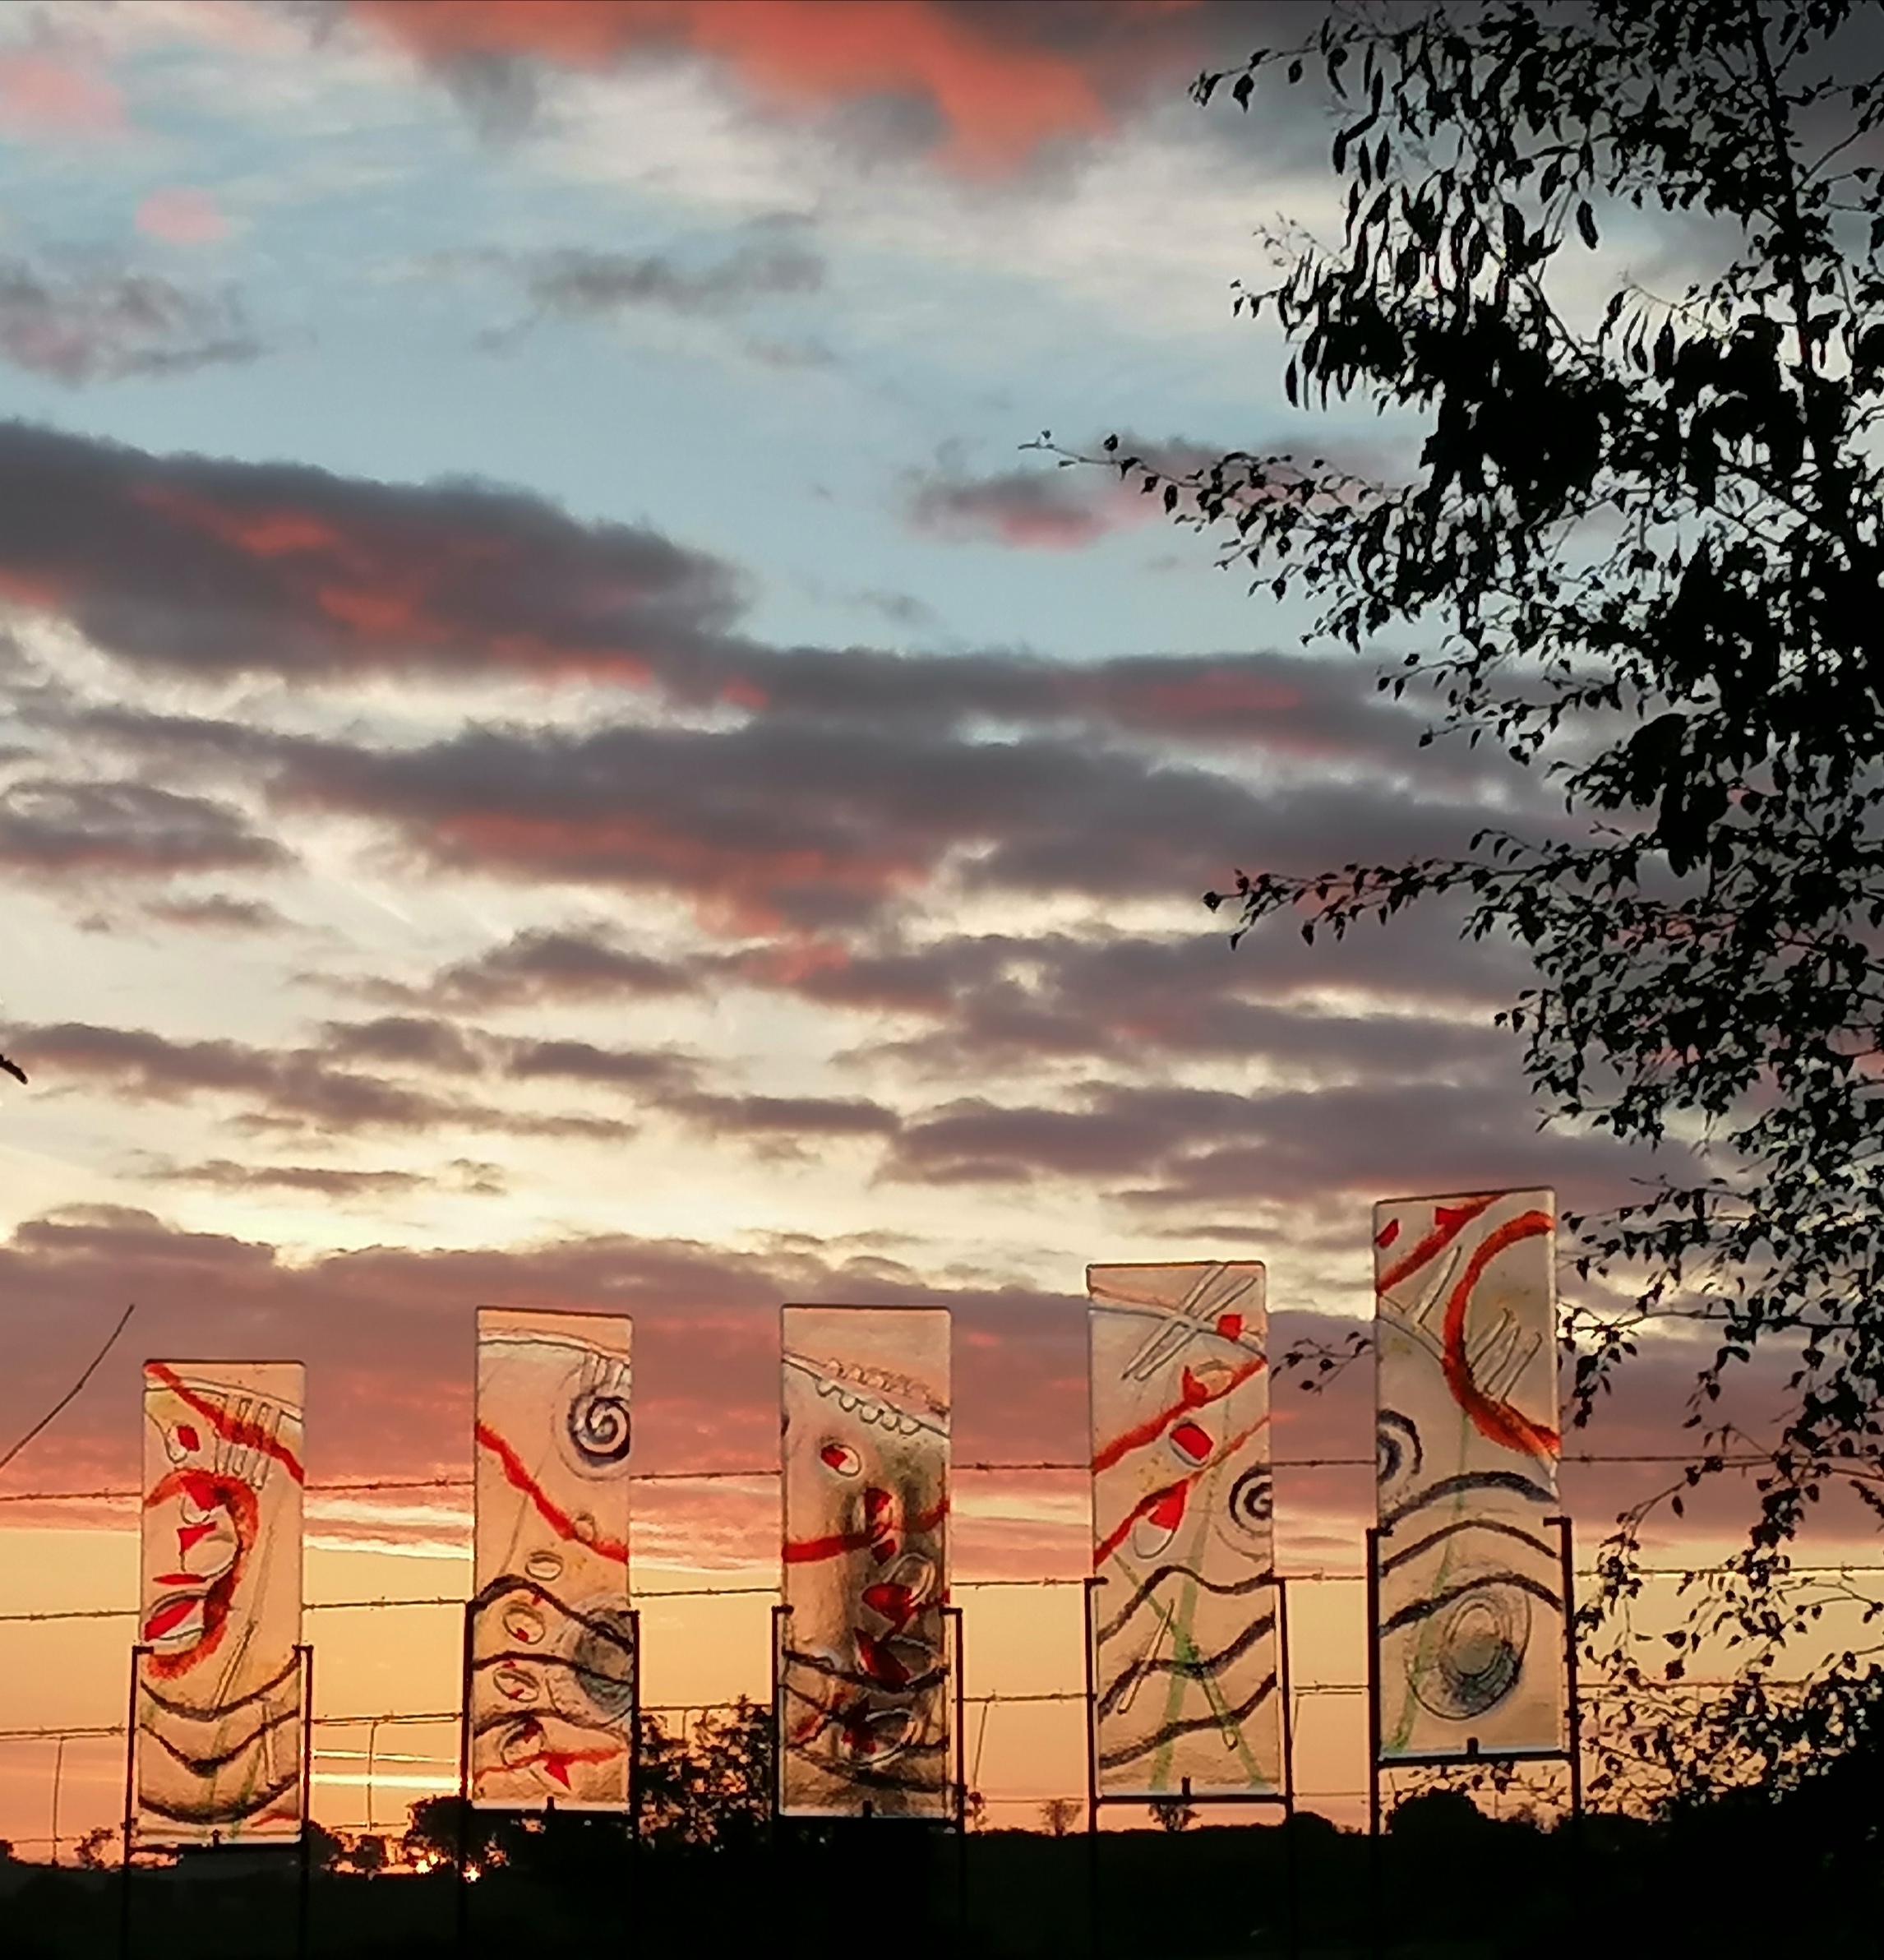 Five see through glass rectangular sculpture with red, blue and clear spirals, wavy lines and patterns on them, photographed against a pink and blue sunset sky.